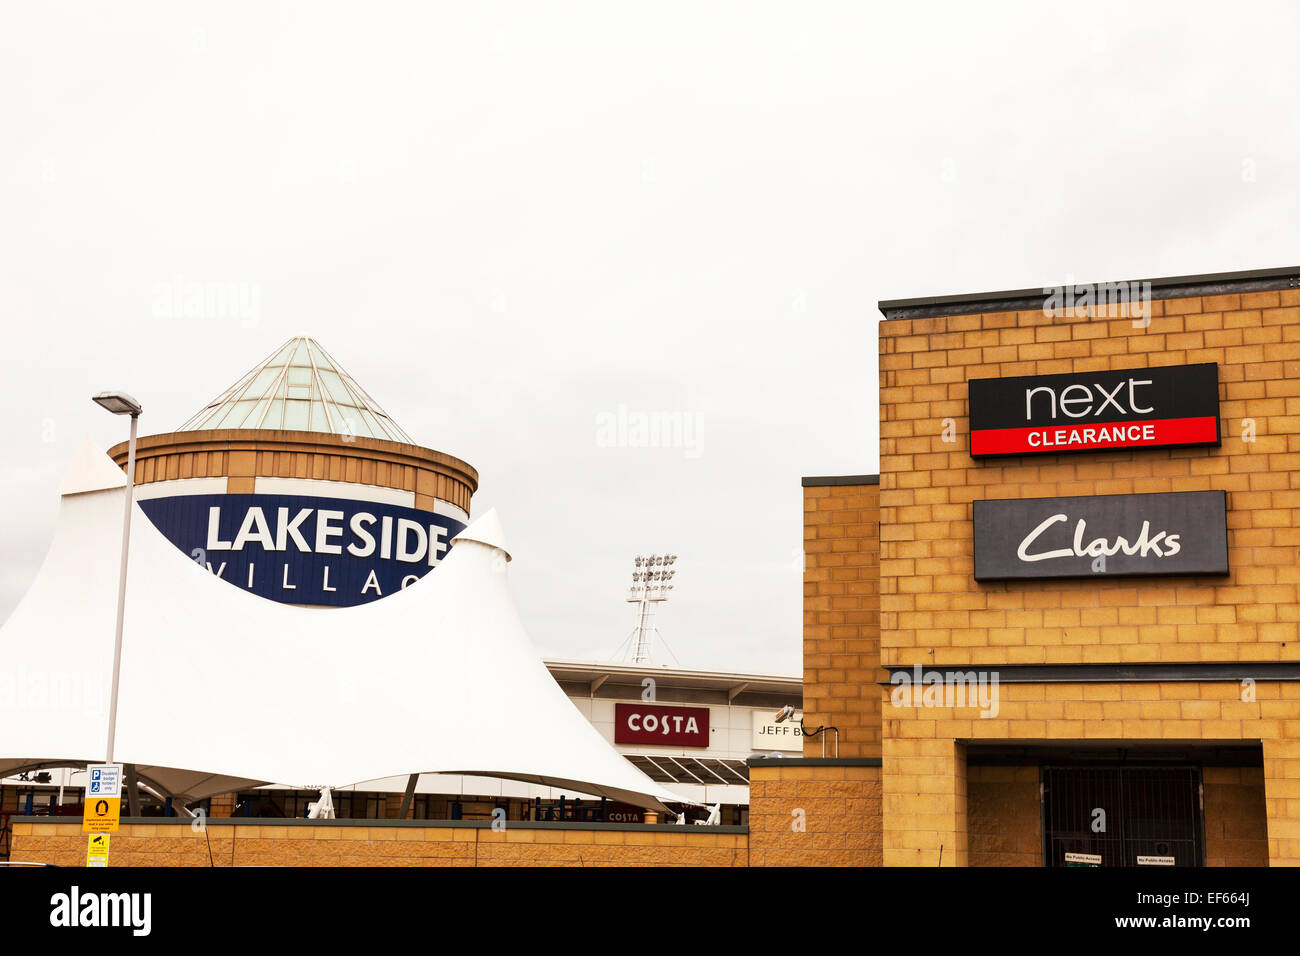 clarks outlet lakeside